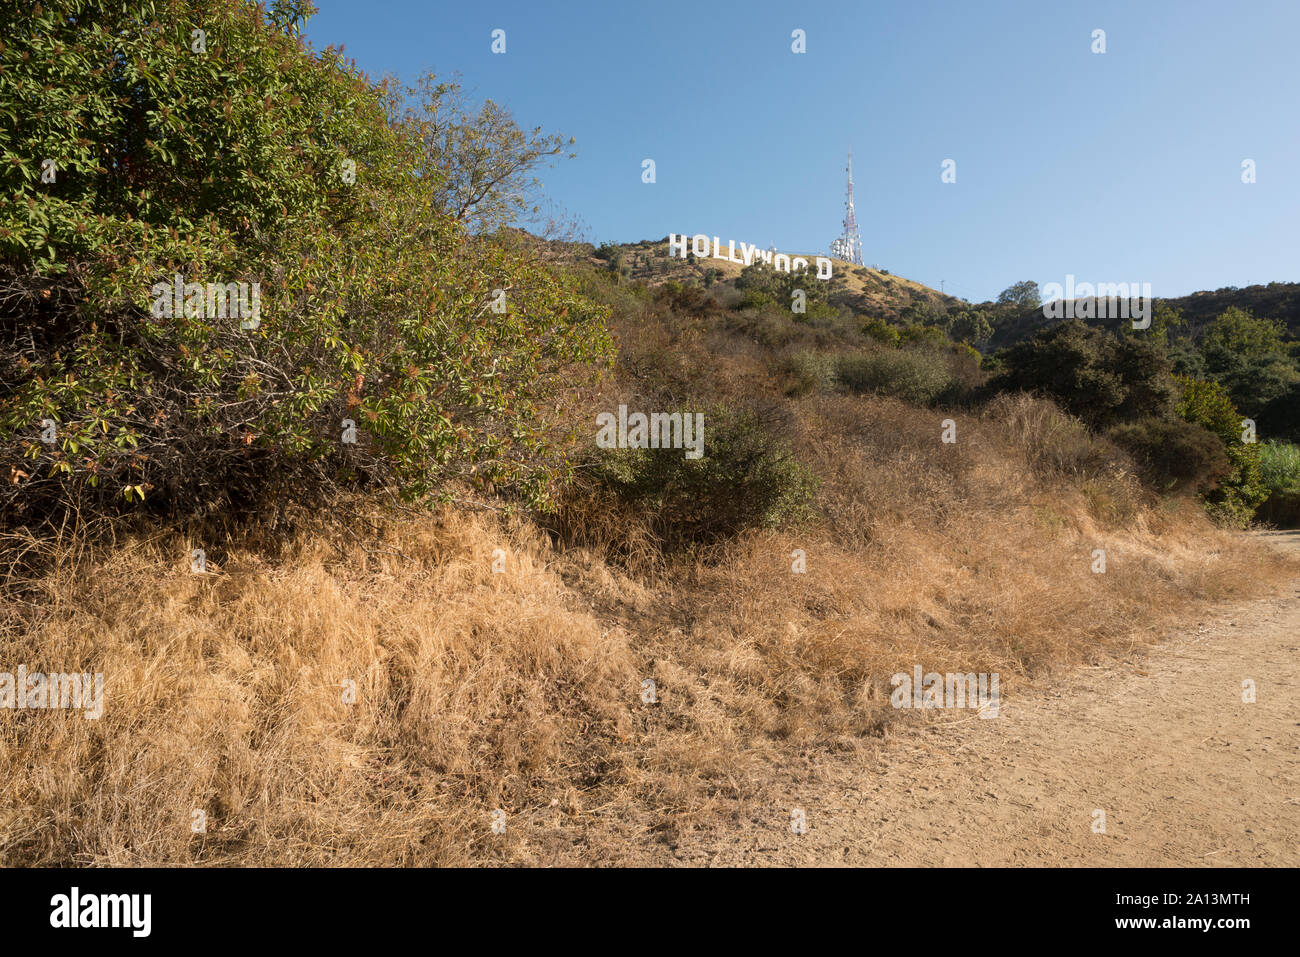 Hollywood Hills, a Los Angeles California Foto Stock